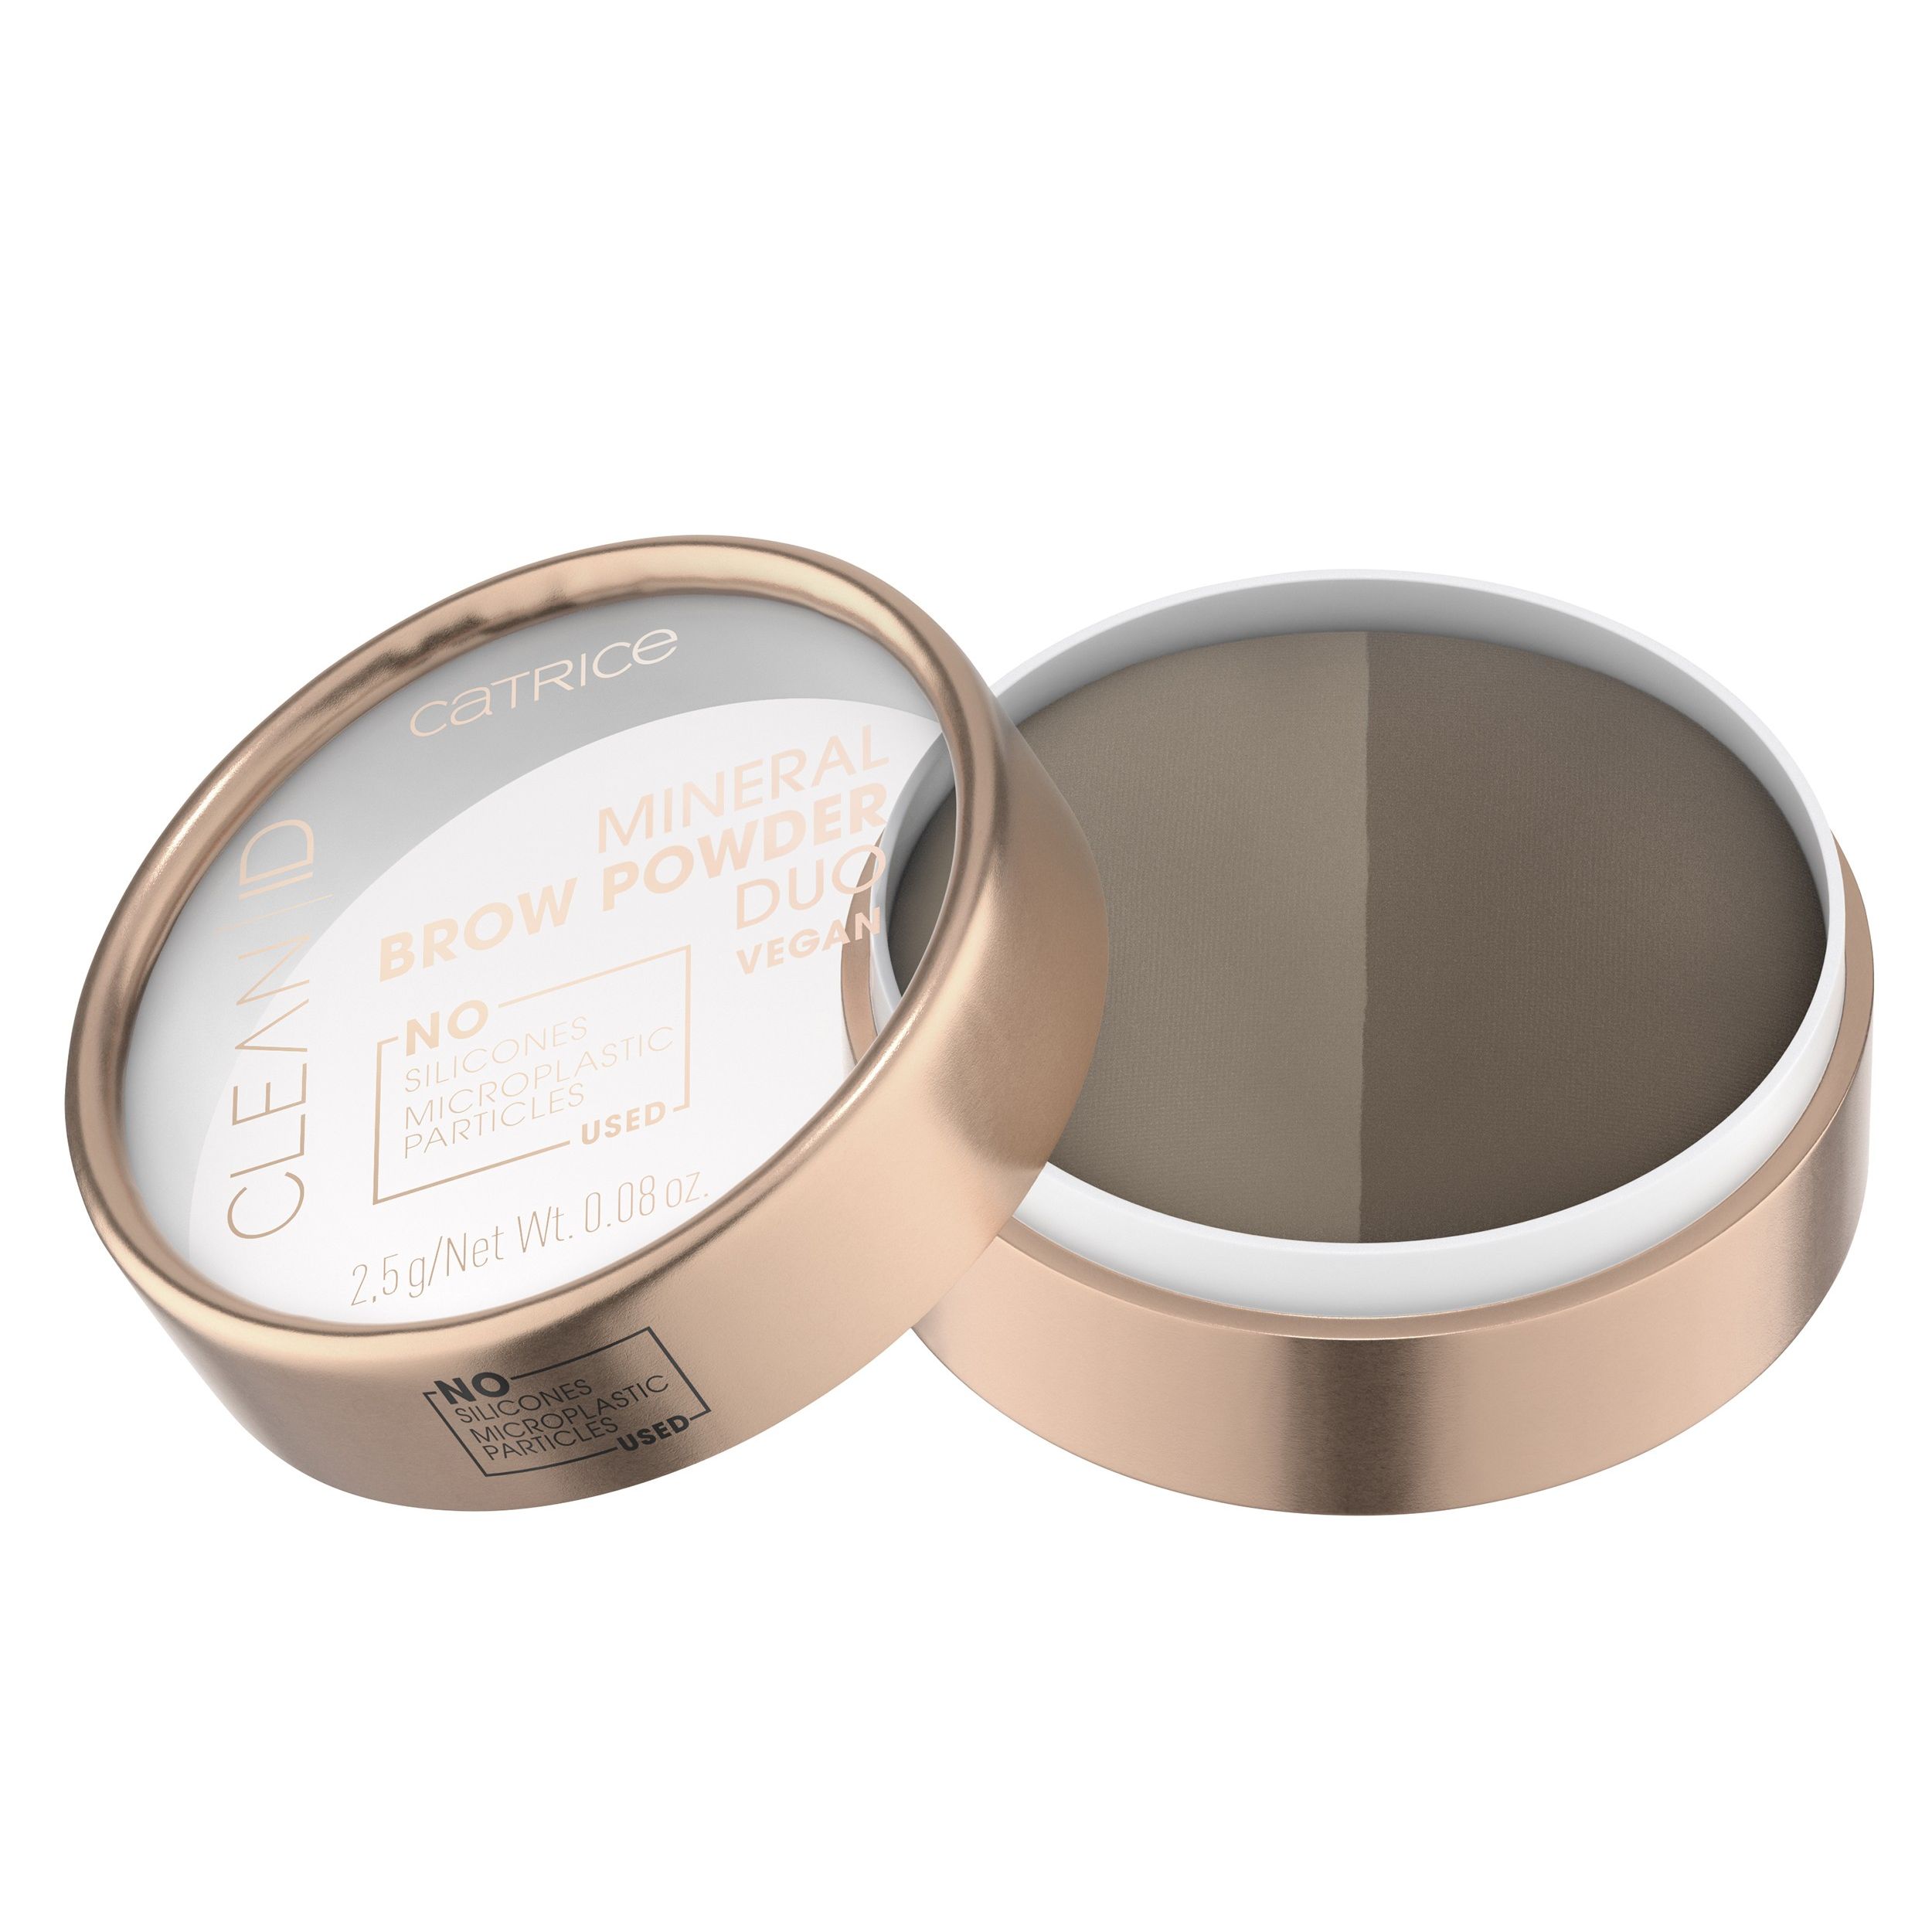 Clean ID Mineral Brow Powder Duo